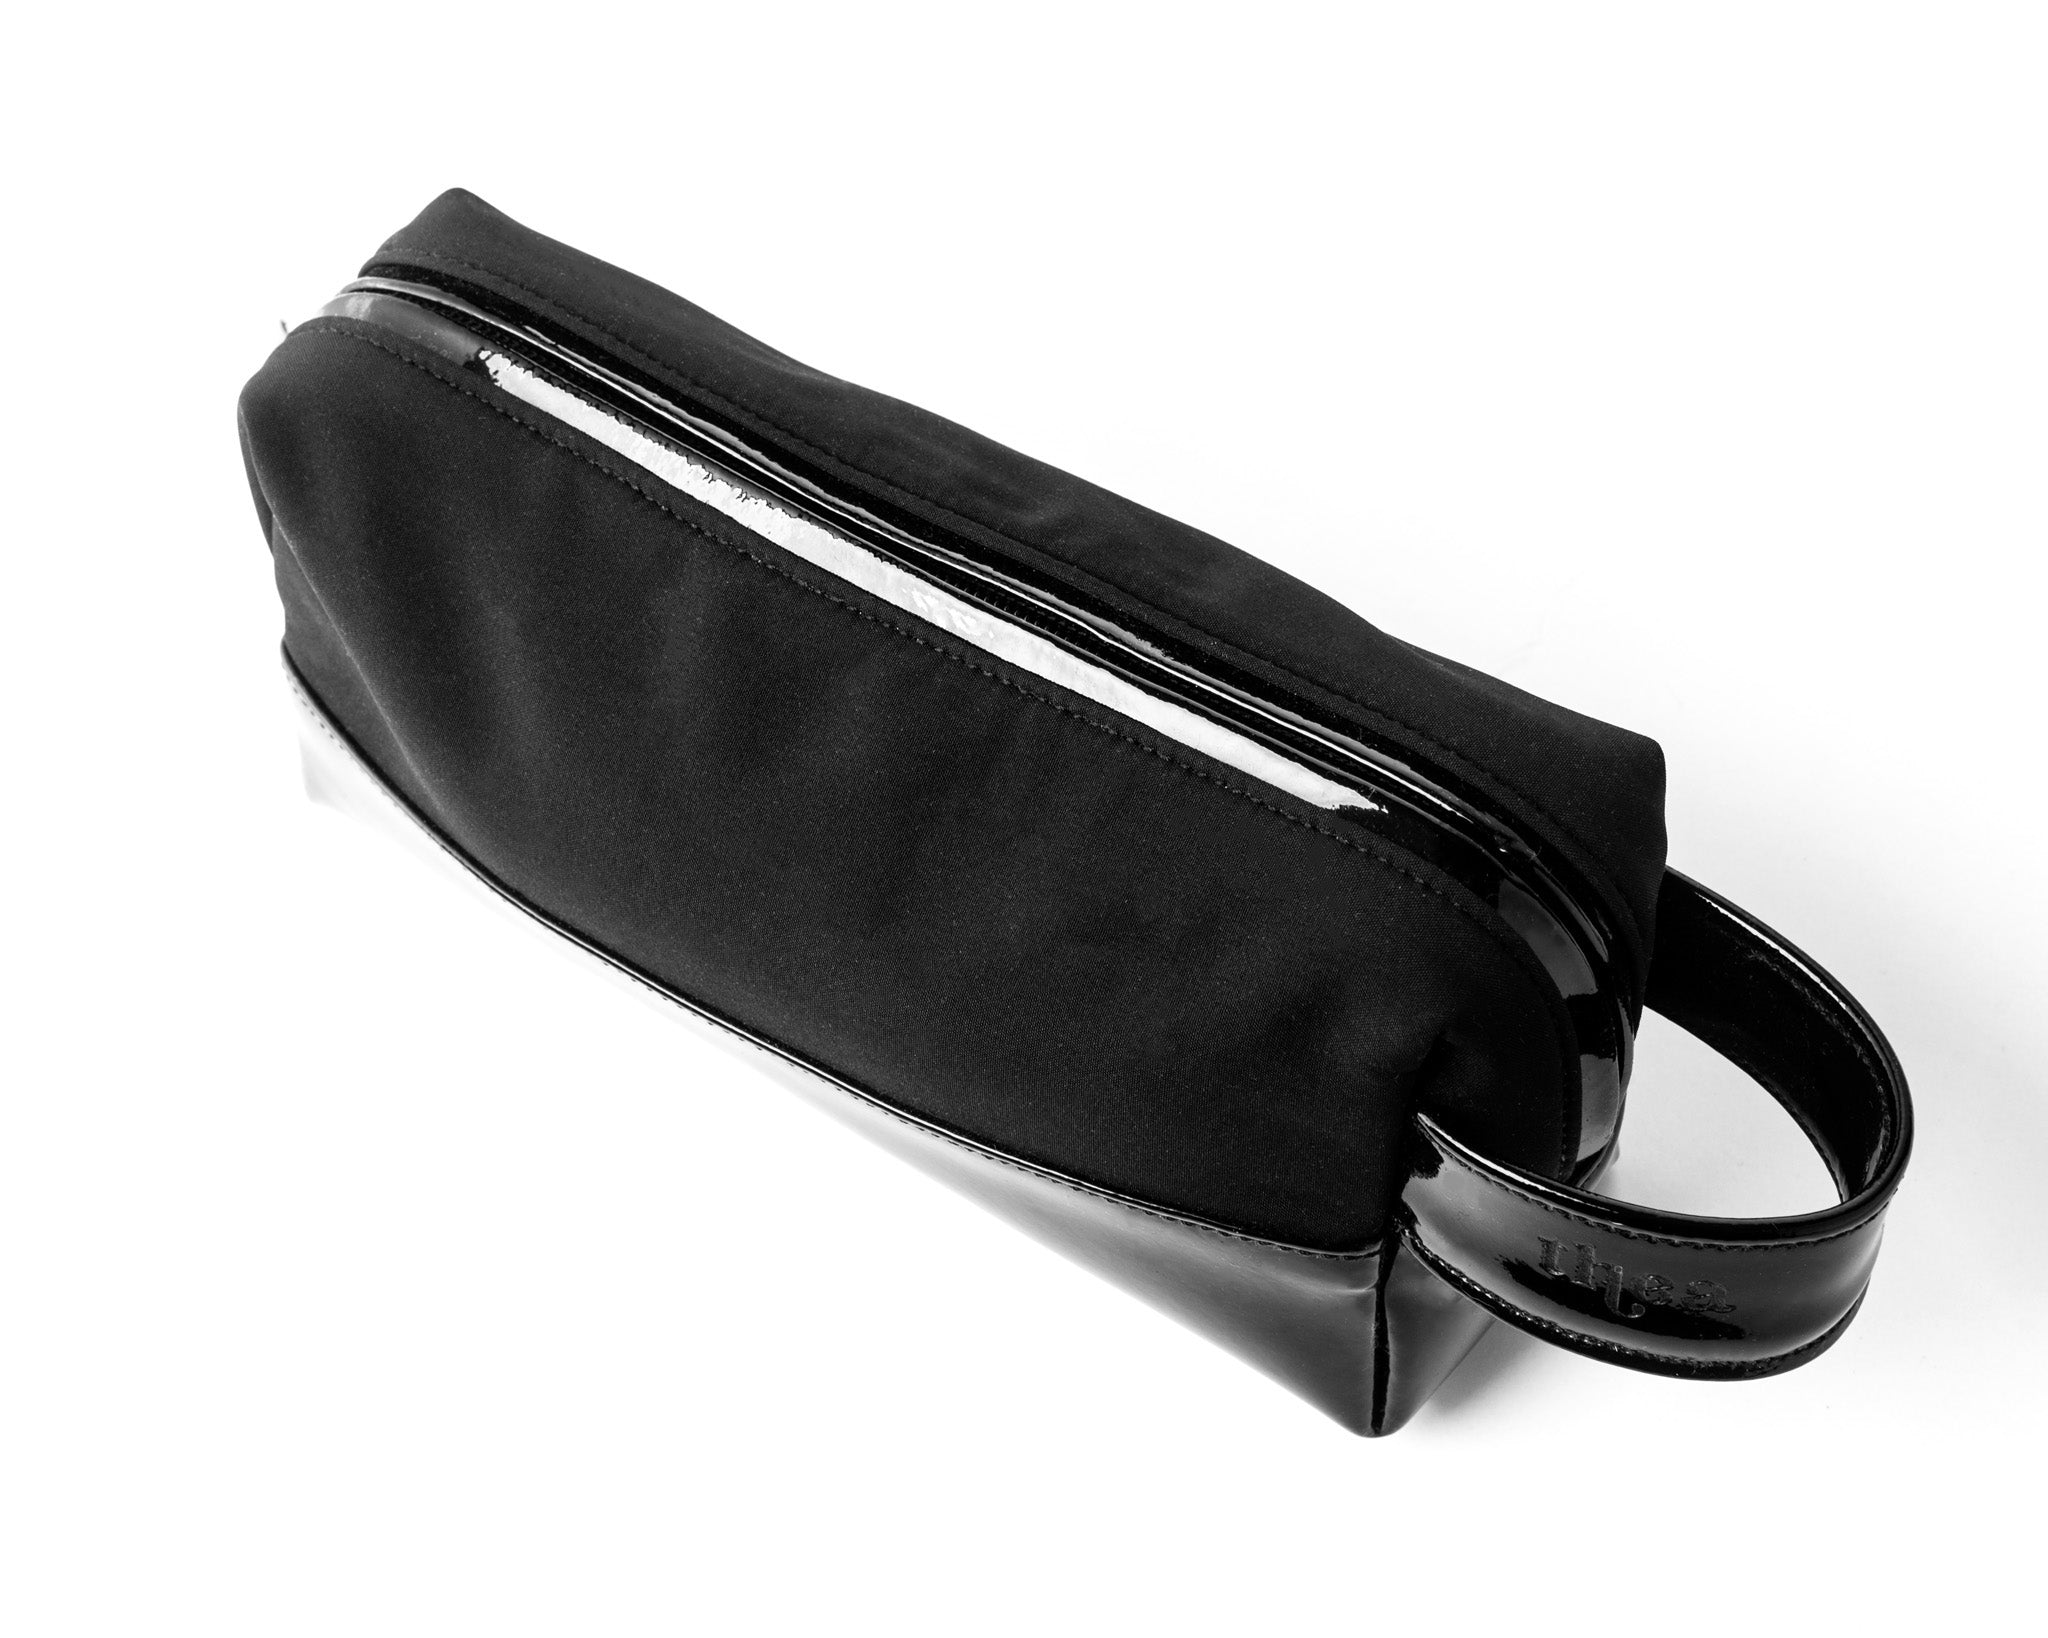 SCENT Beauty Case Small-Black Patent Leather - theabags